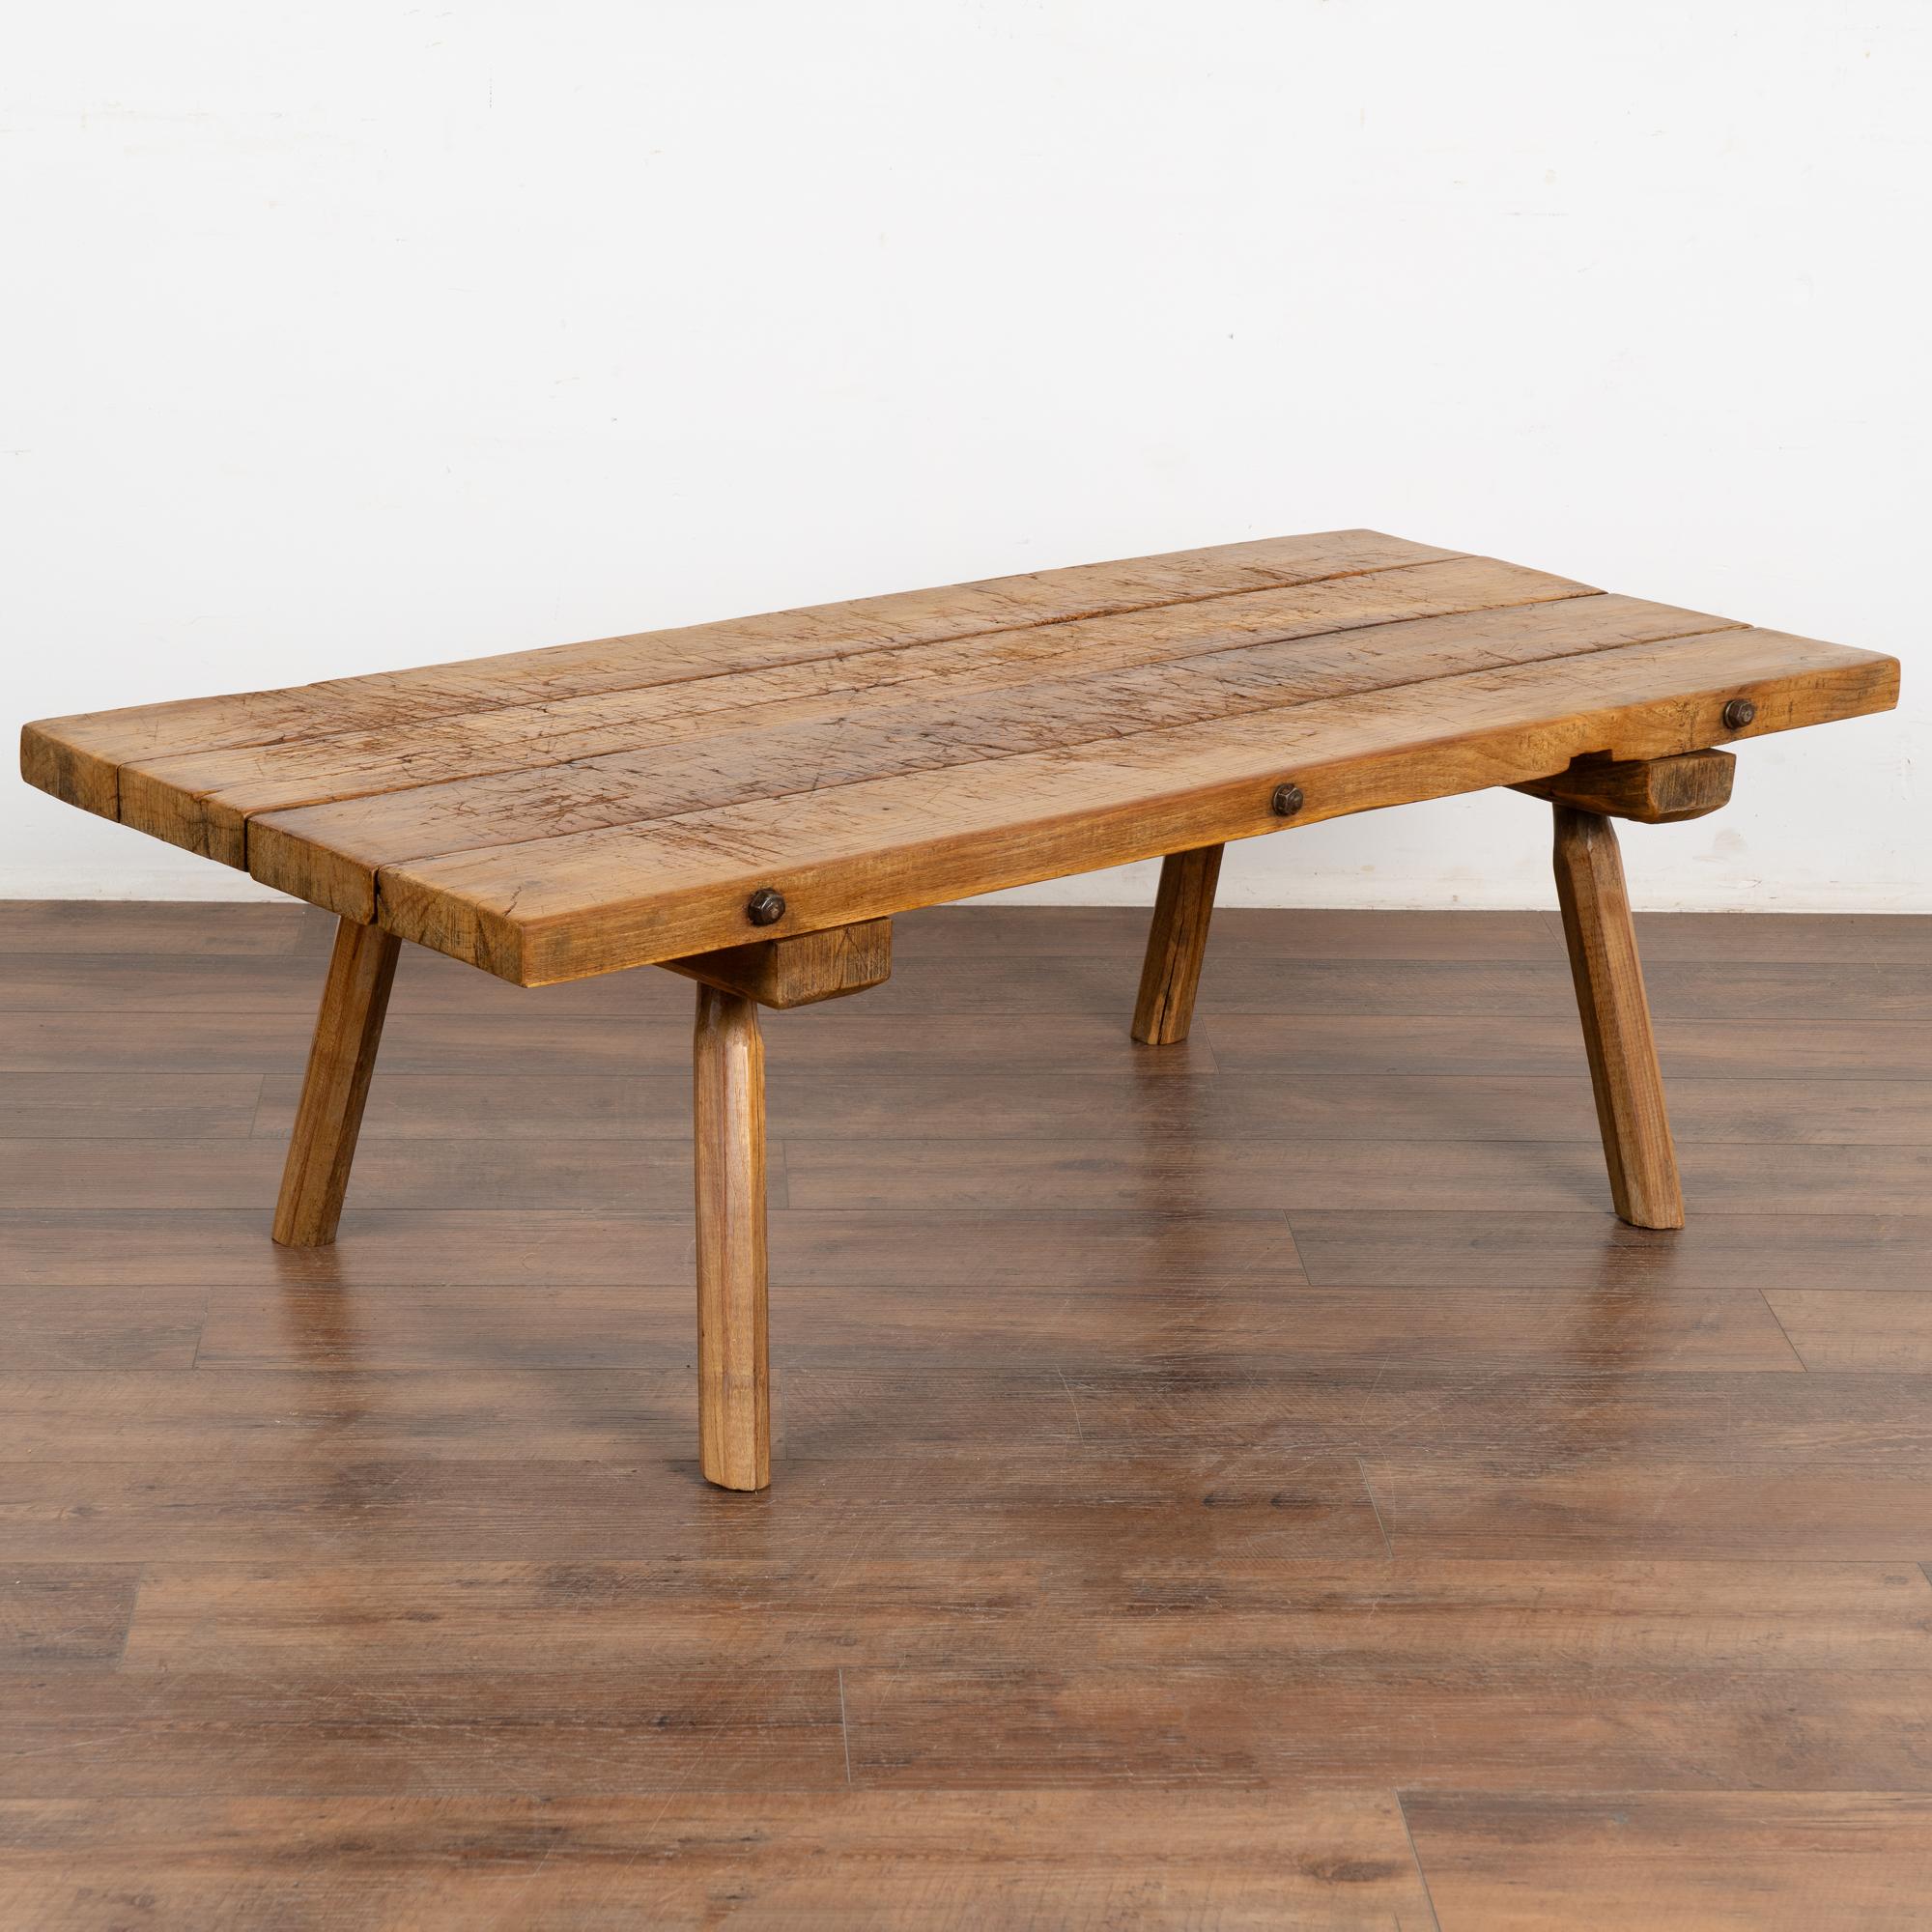 This rustic slab wood coffee table with peg legs is loaded with vintage character due to the heavily distressed wood of the top and visible iron bolts along the edge.
The thick top made of four heavy planks is covered in scrapes, gouges, cracks,